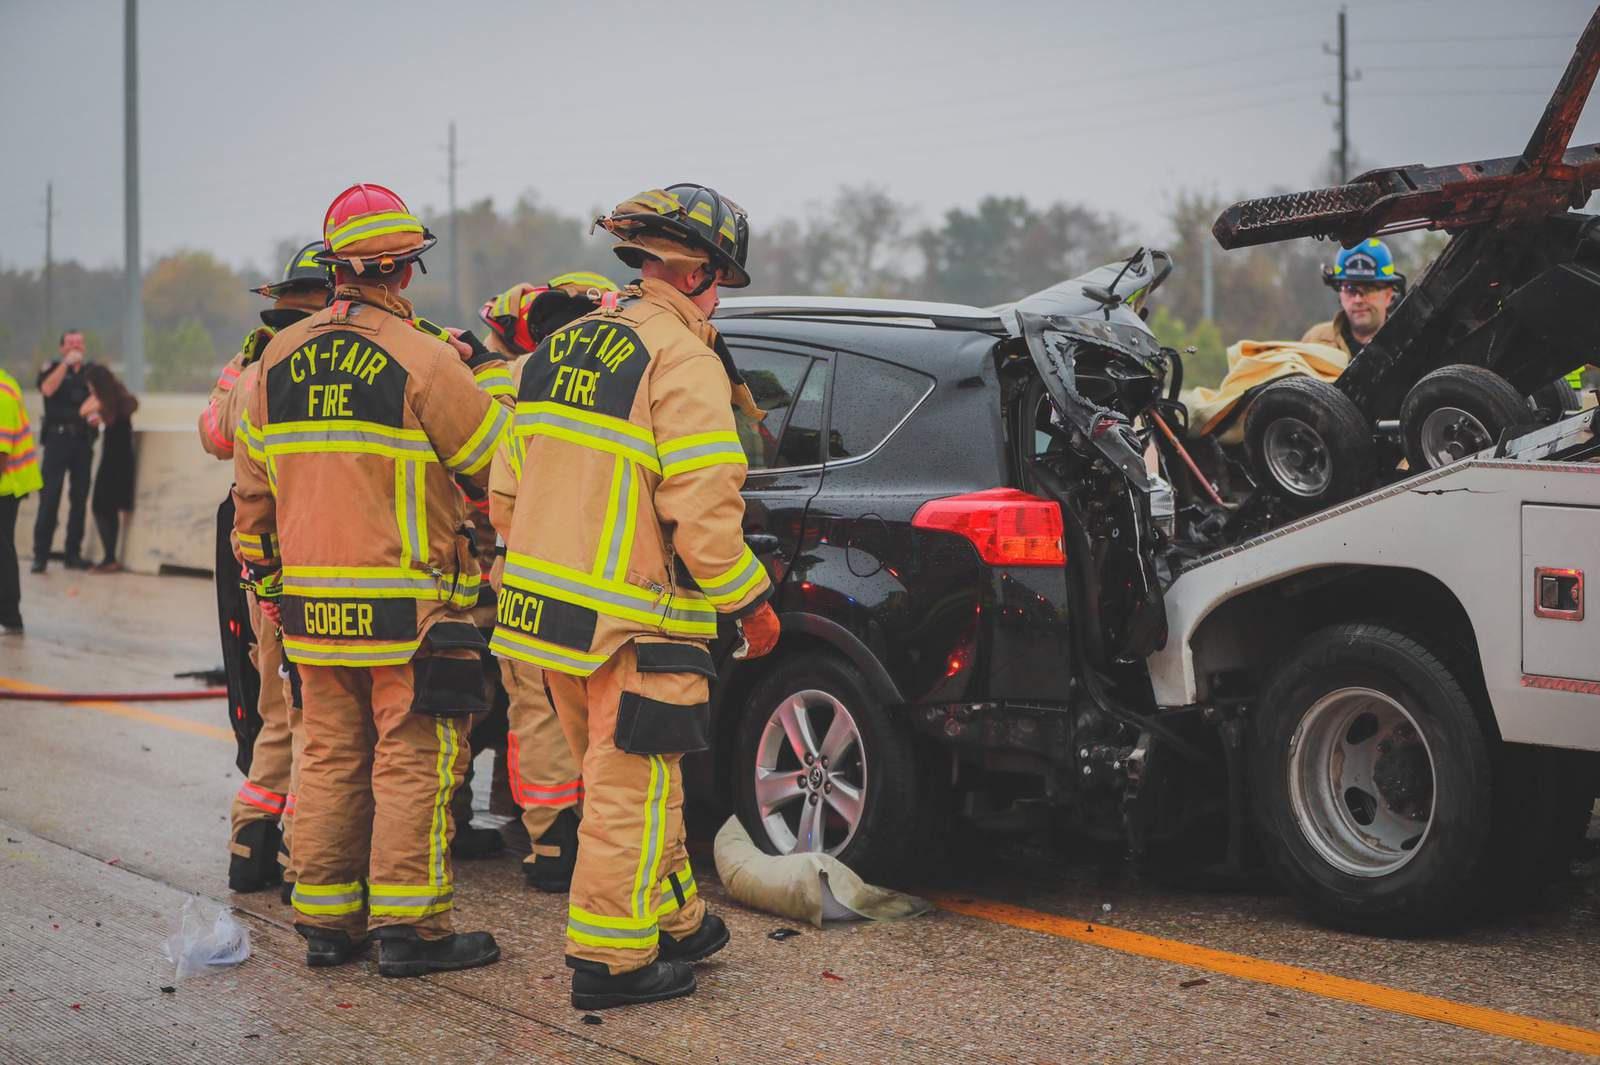 Cy-Fair FD: 12-year-old hospitalized in critical condition following wreck on US 290